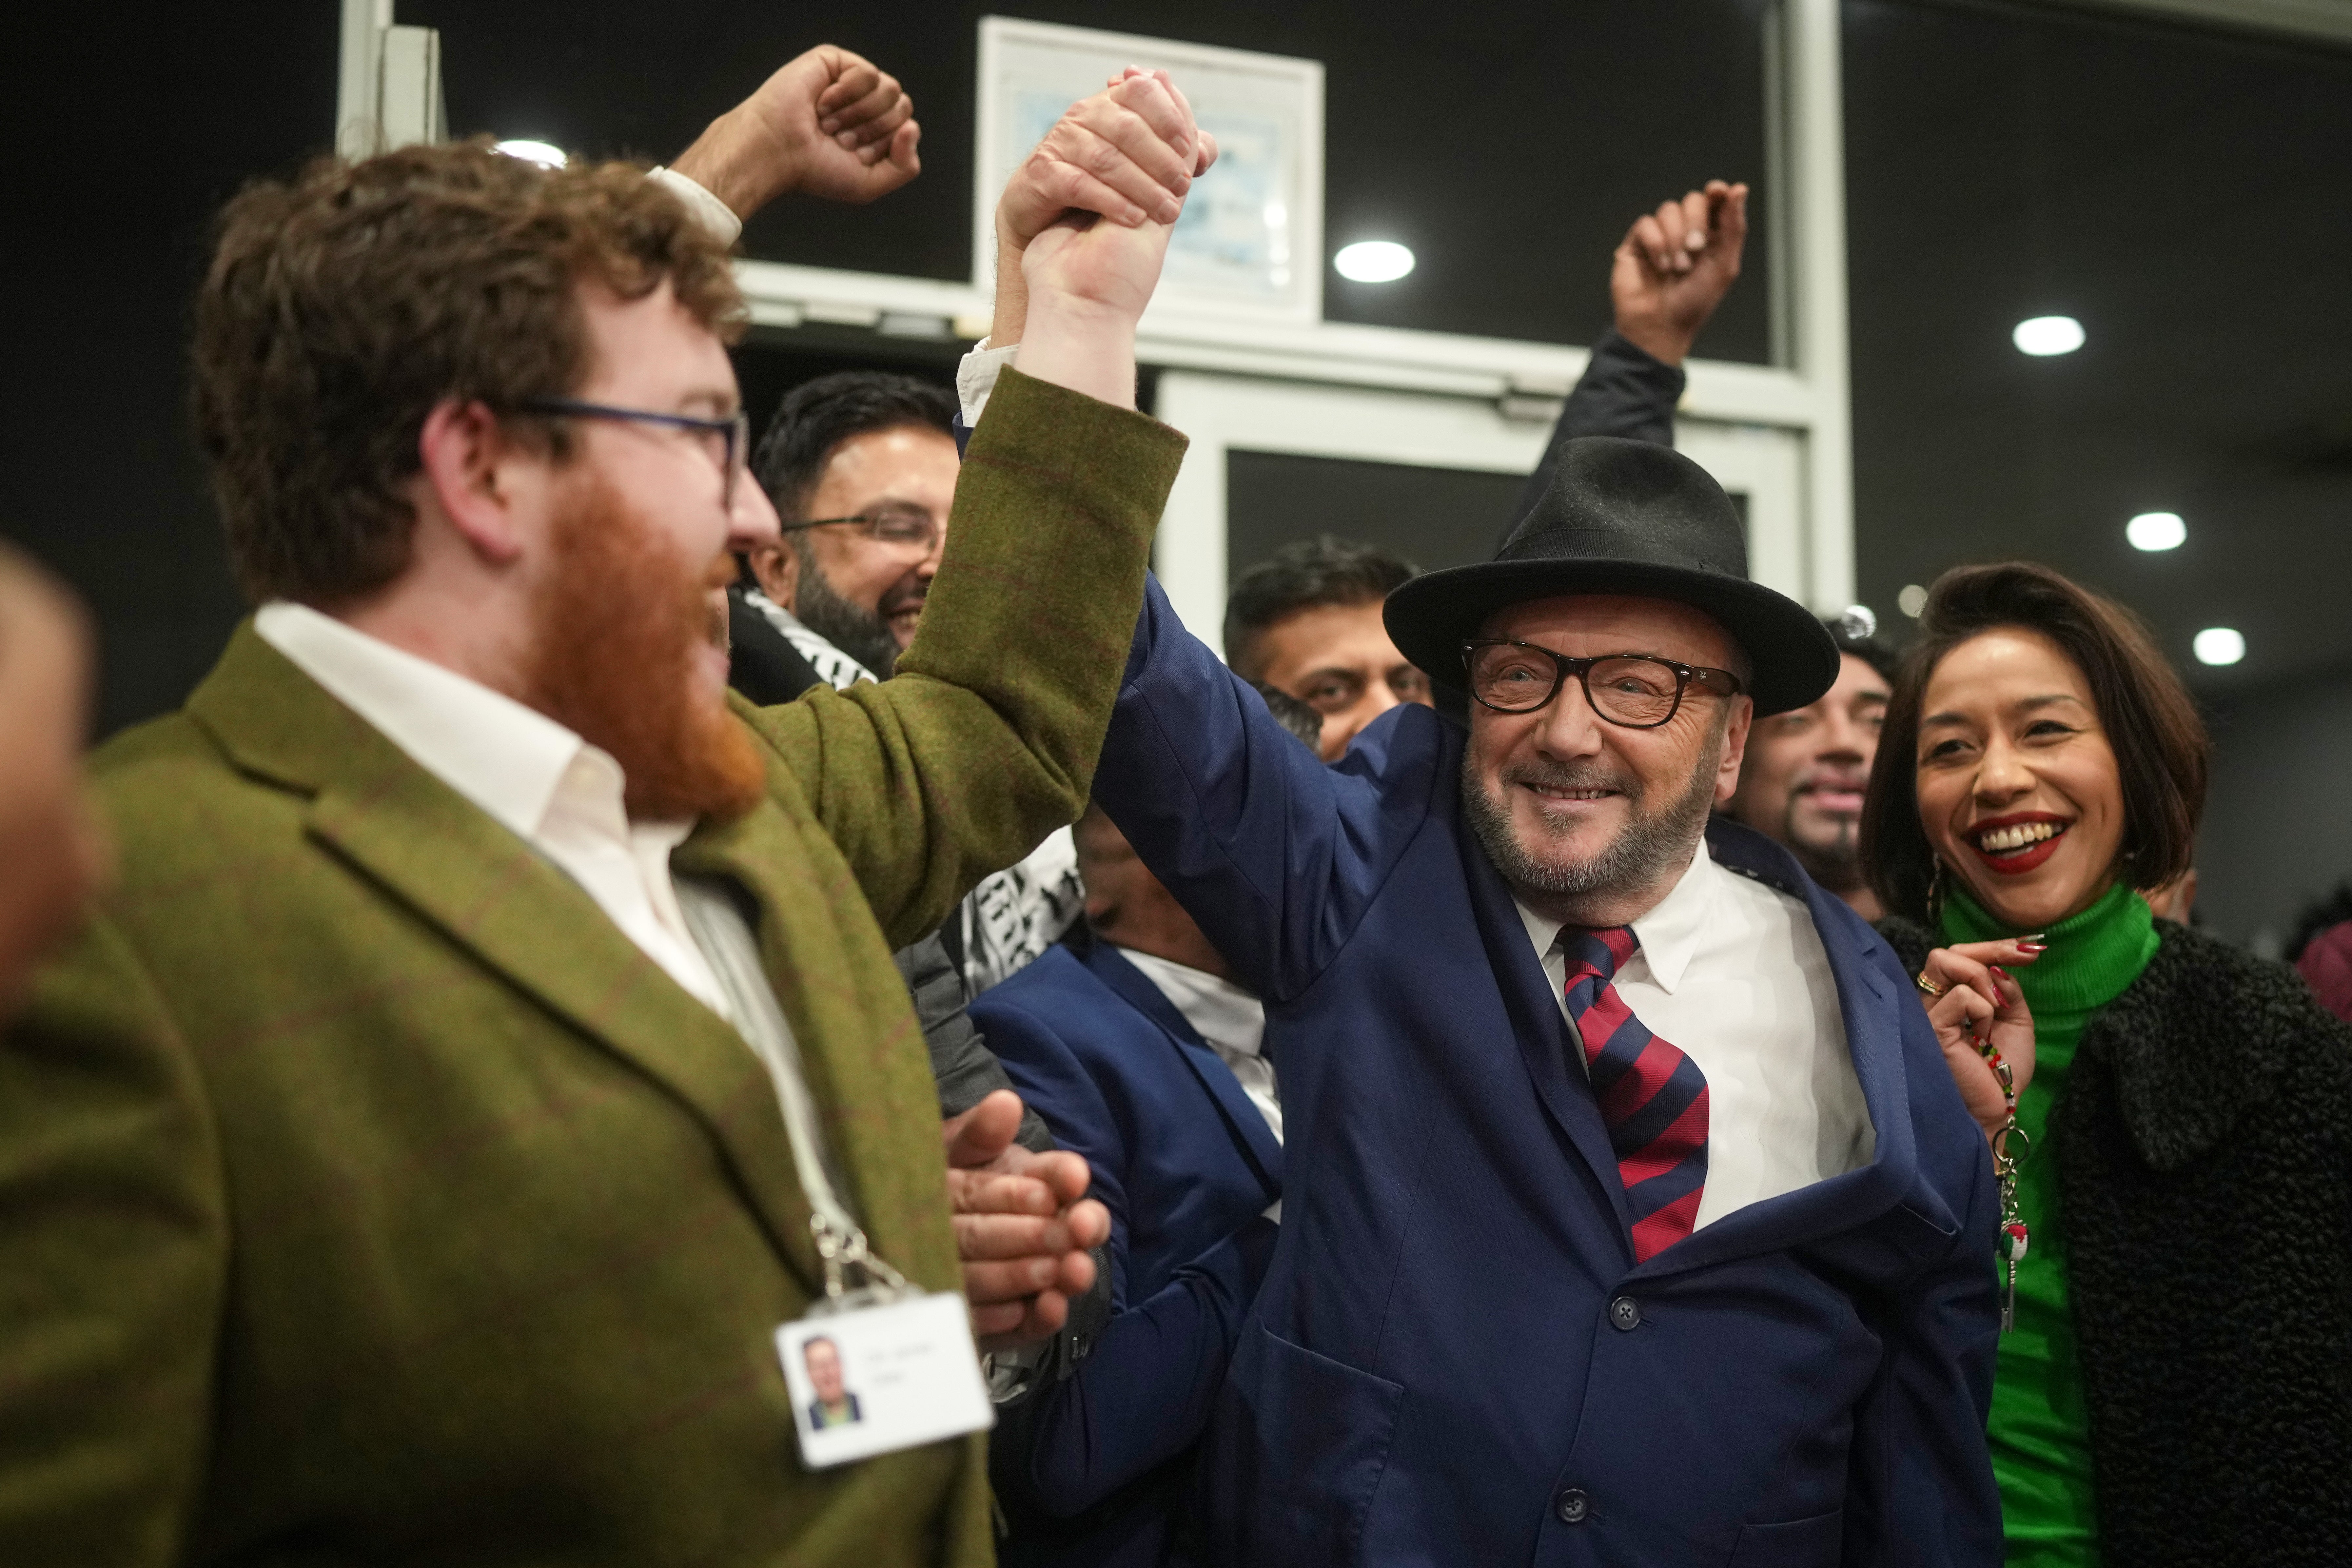 The people of Tower Hamlets and Bradford saw through George Galloway and sent him packing – so will the people of Rochdale